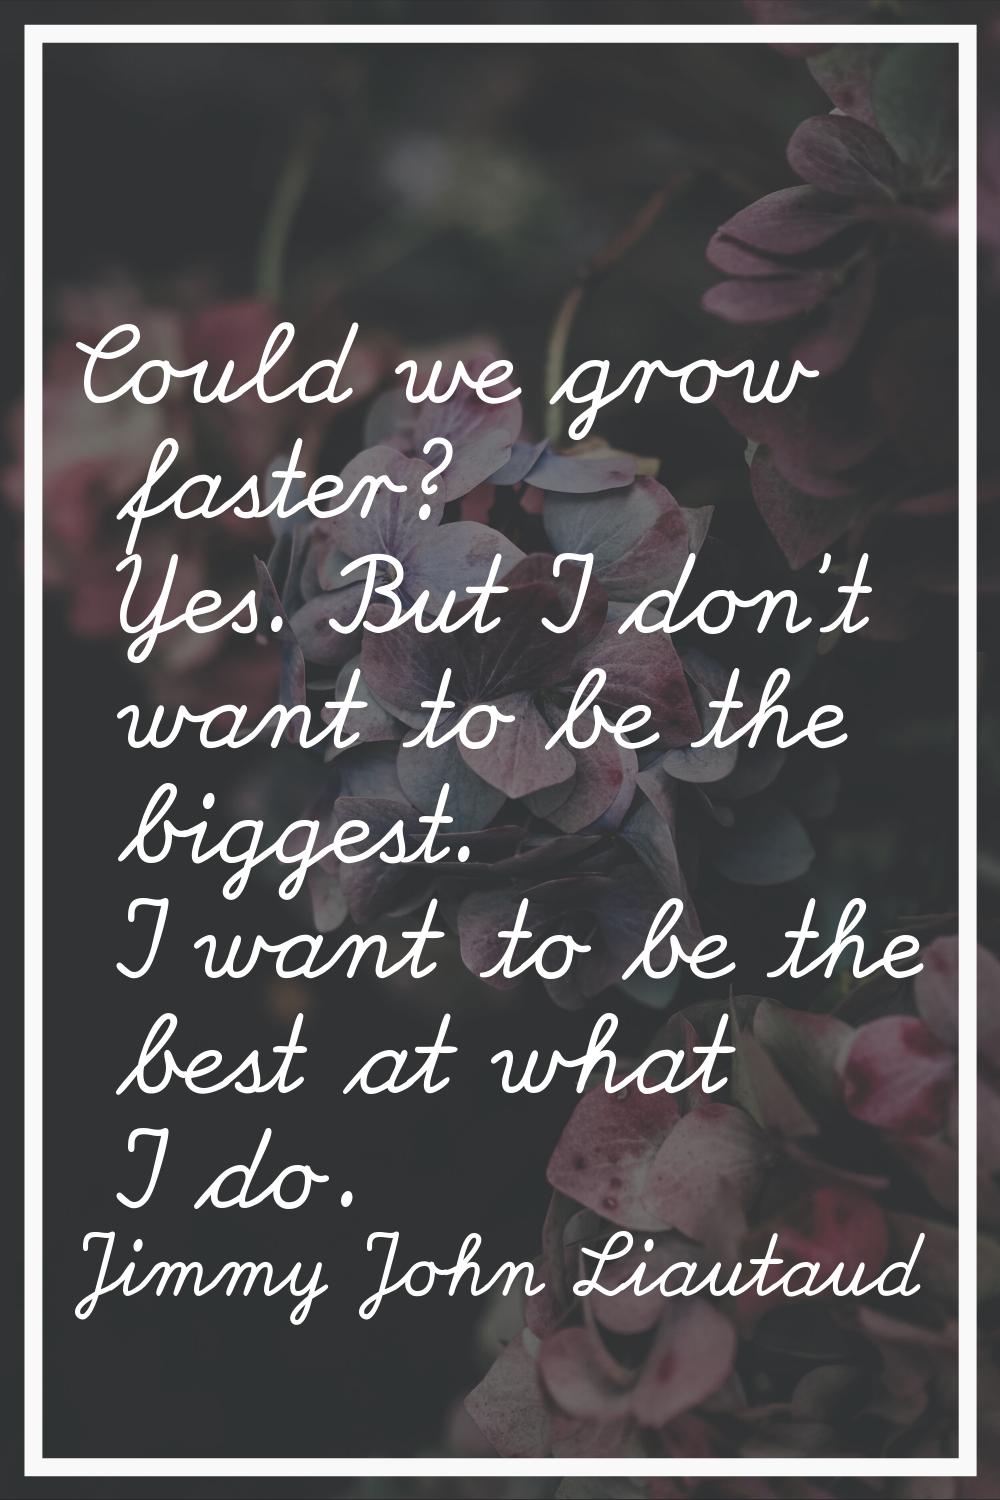 Could we grow faster? Yes. But I don't want to be the biggest. I want to be the best at what I do.